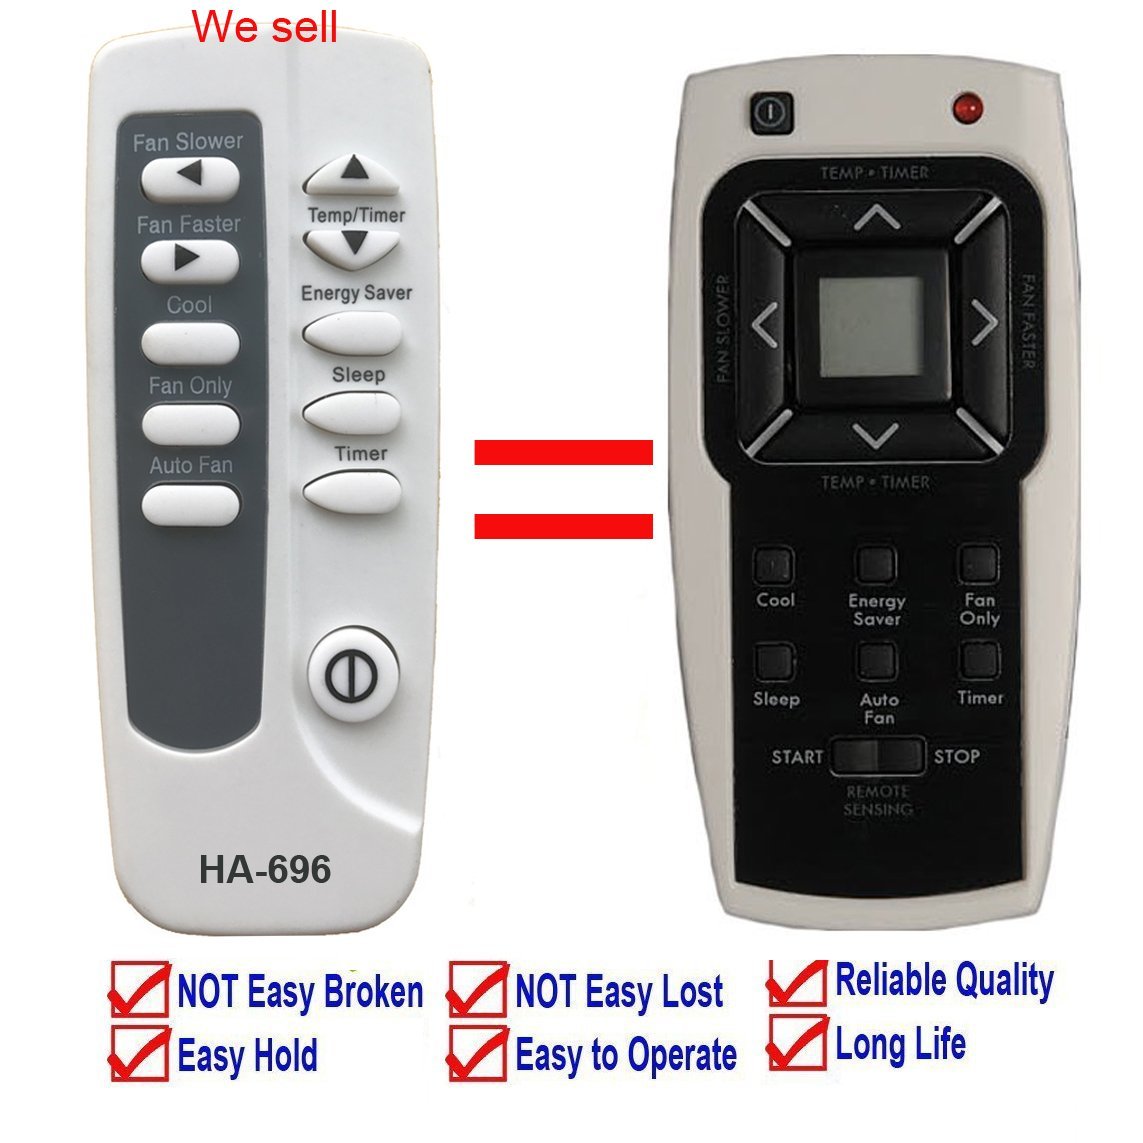 Fireplace Remote Control Replacement Lovely Ying Ray Replacement for Kenmore Air Conditioner Remote Control for Model 253 253 253 253 253